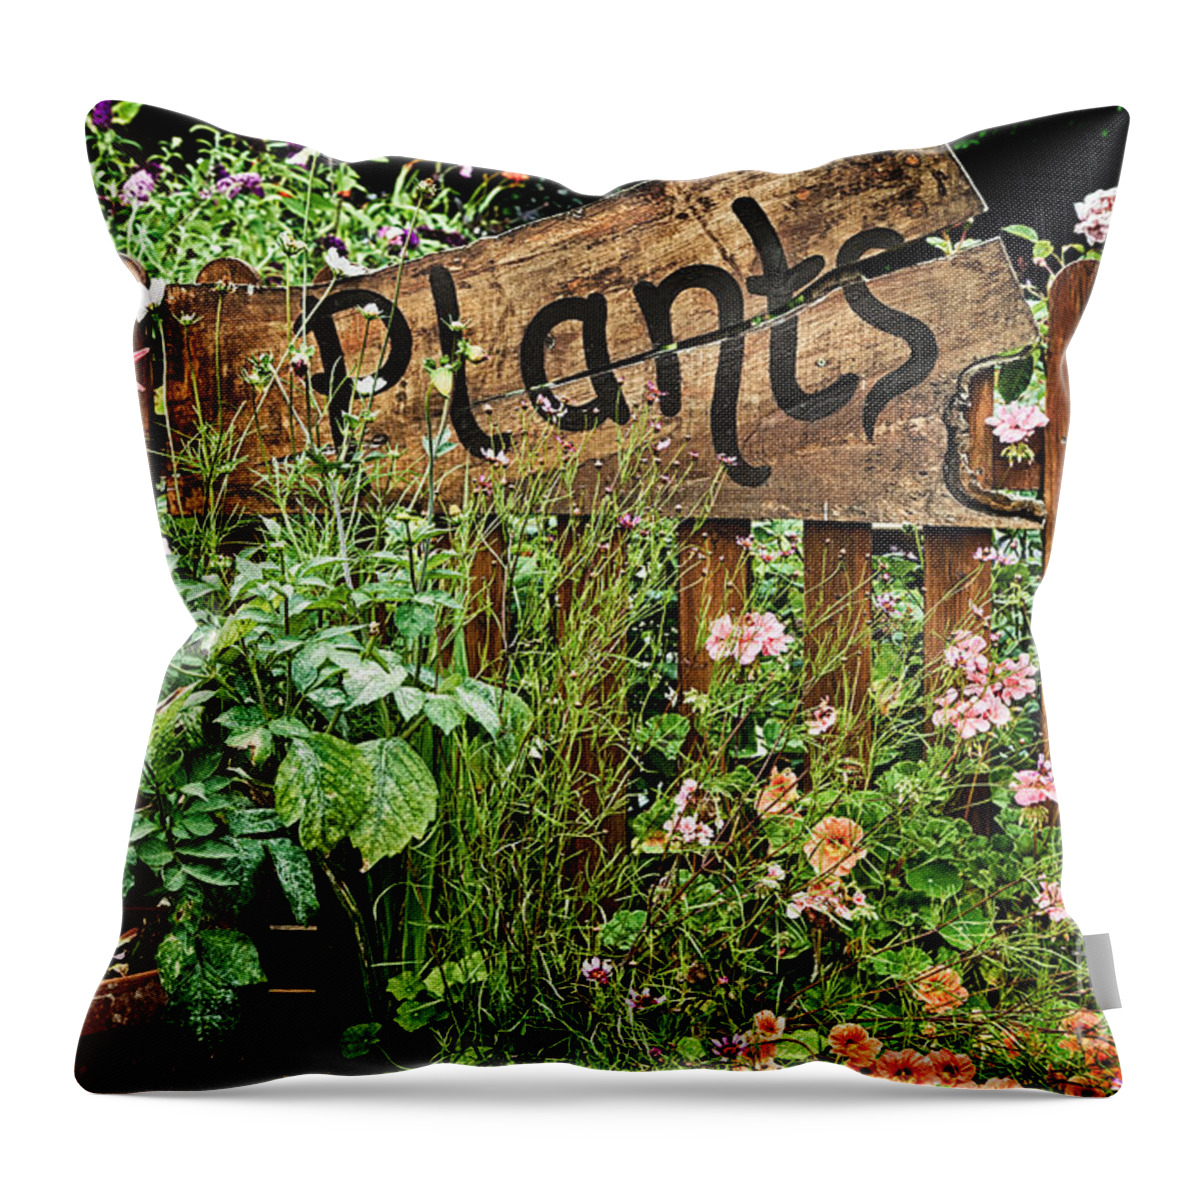 Plants Throw Pillow featuring the photograph Wooden plant sign in flowers by Simon Bratt